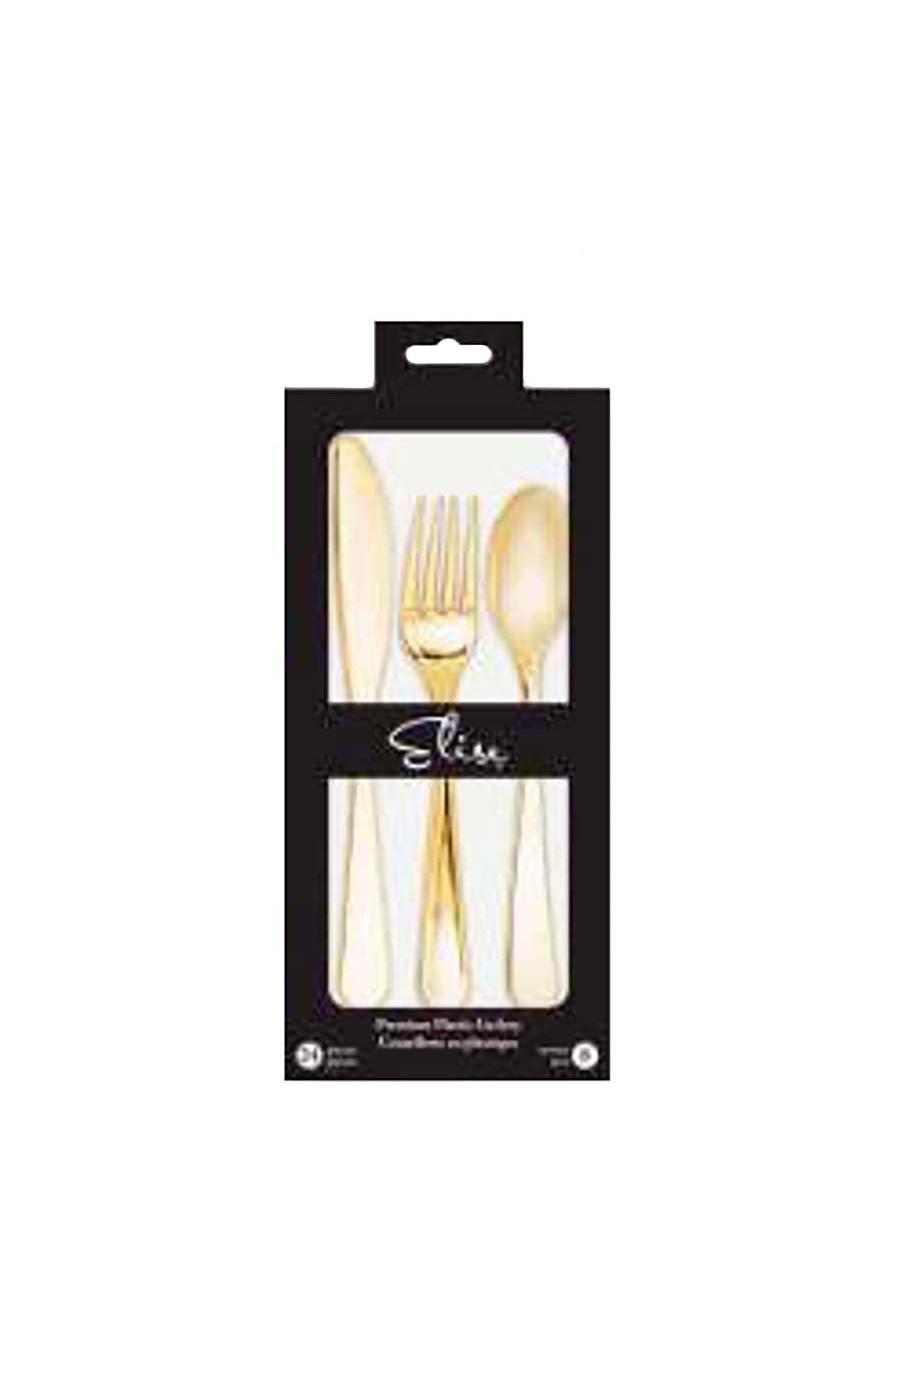 Creative Converting Plastic Knives, Forks & Spoons Combo Set - Metallic Gold; image 2 of 2